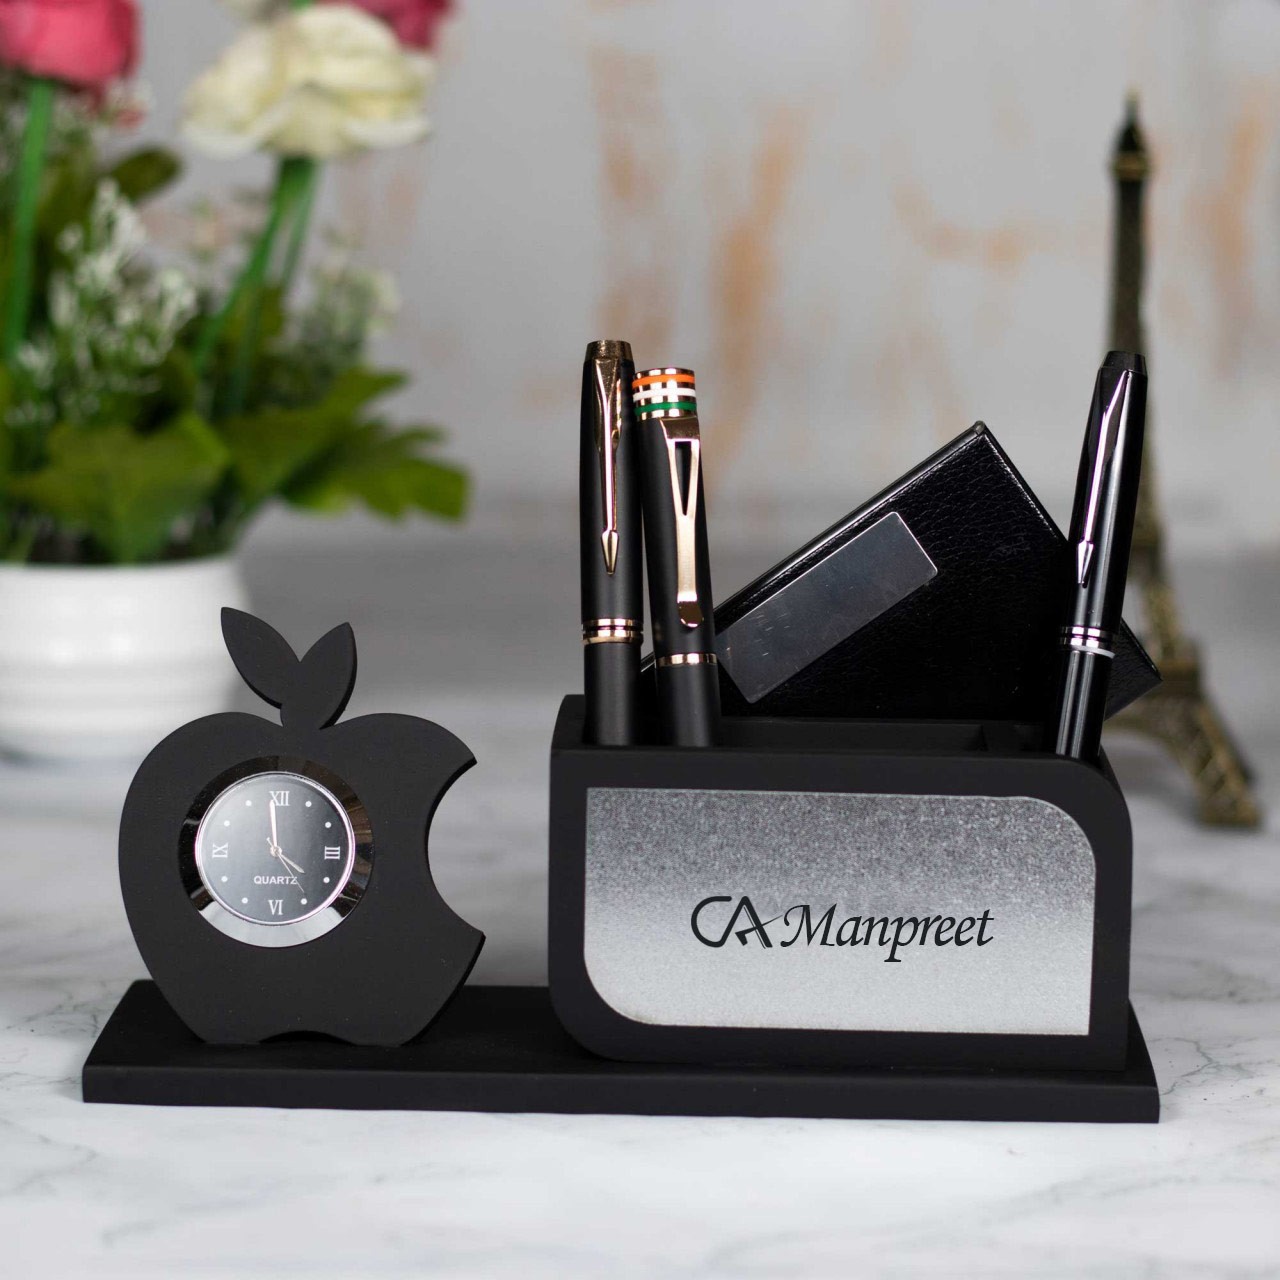 Personalized Apple Table Stand Watch For CA